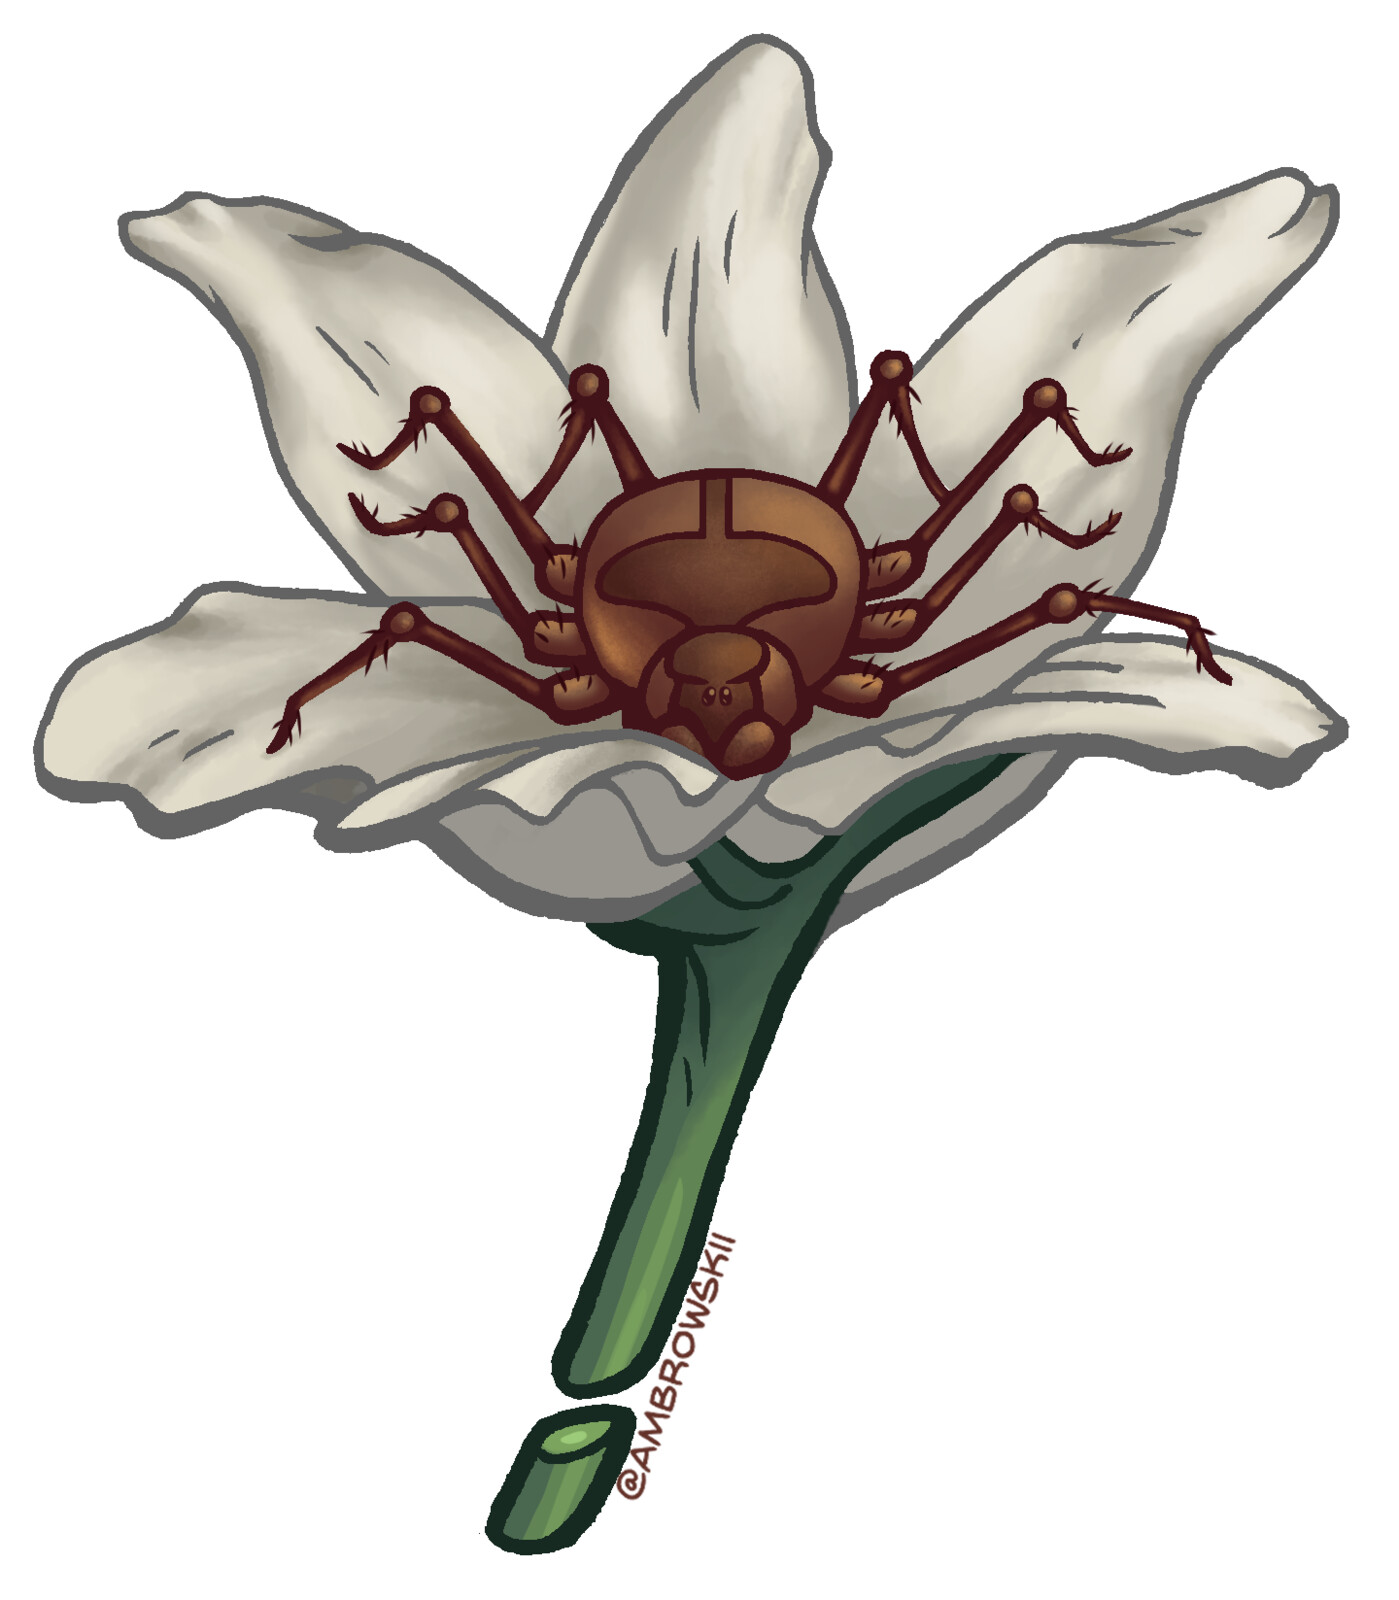 Harmony’s magical familiar is a spider, and her dreams often take her to a field of innocent Lily flowers.